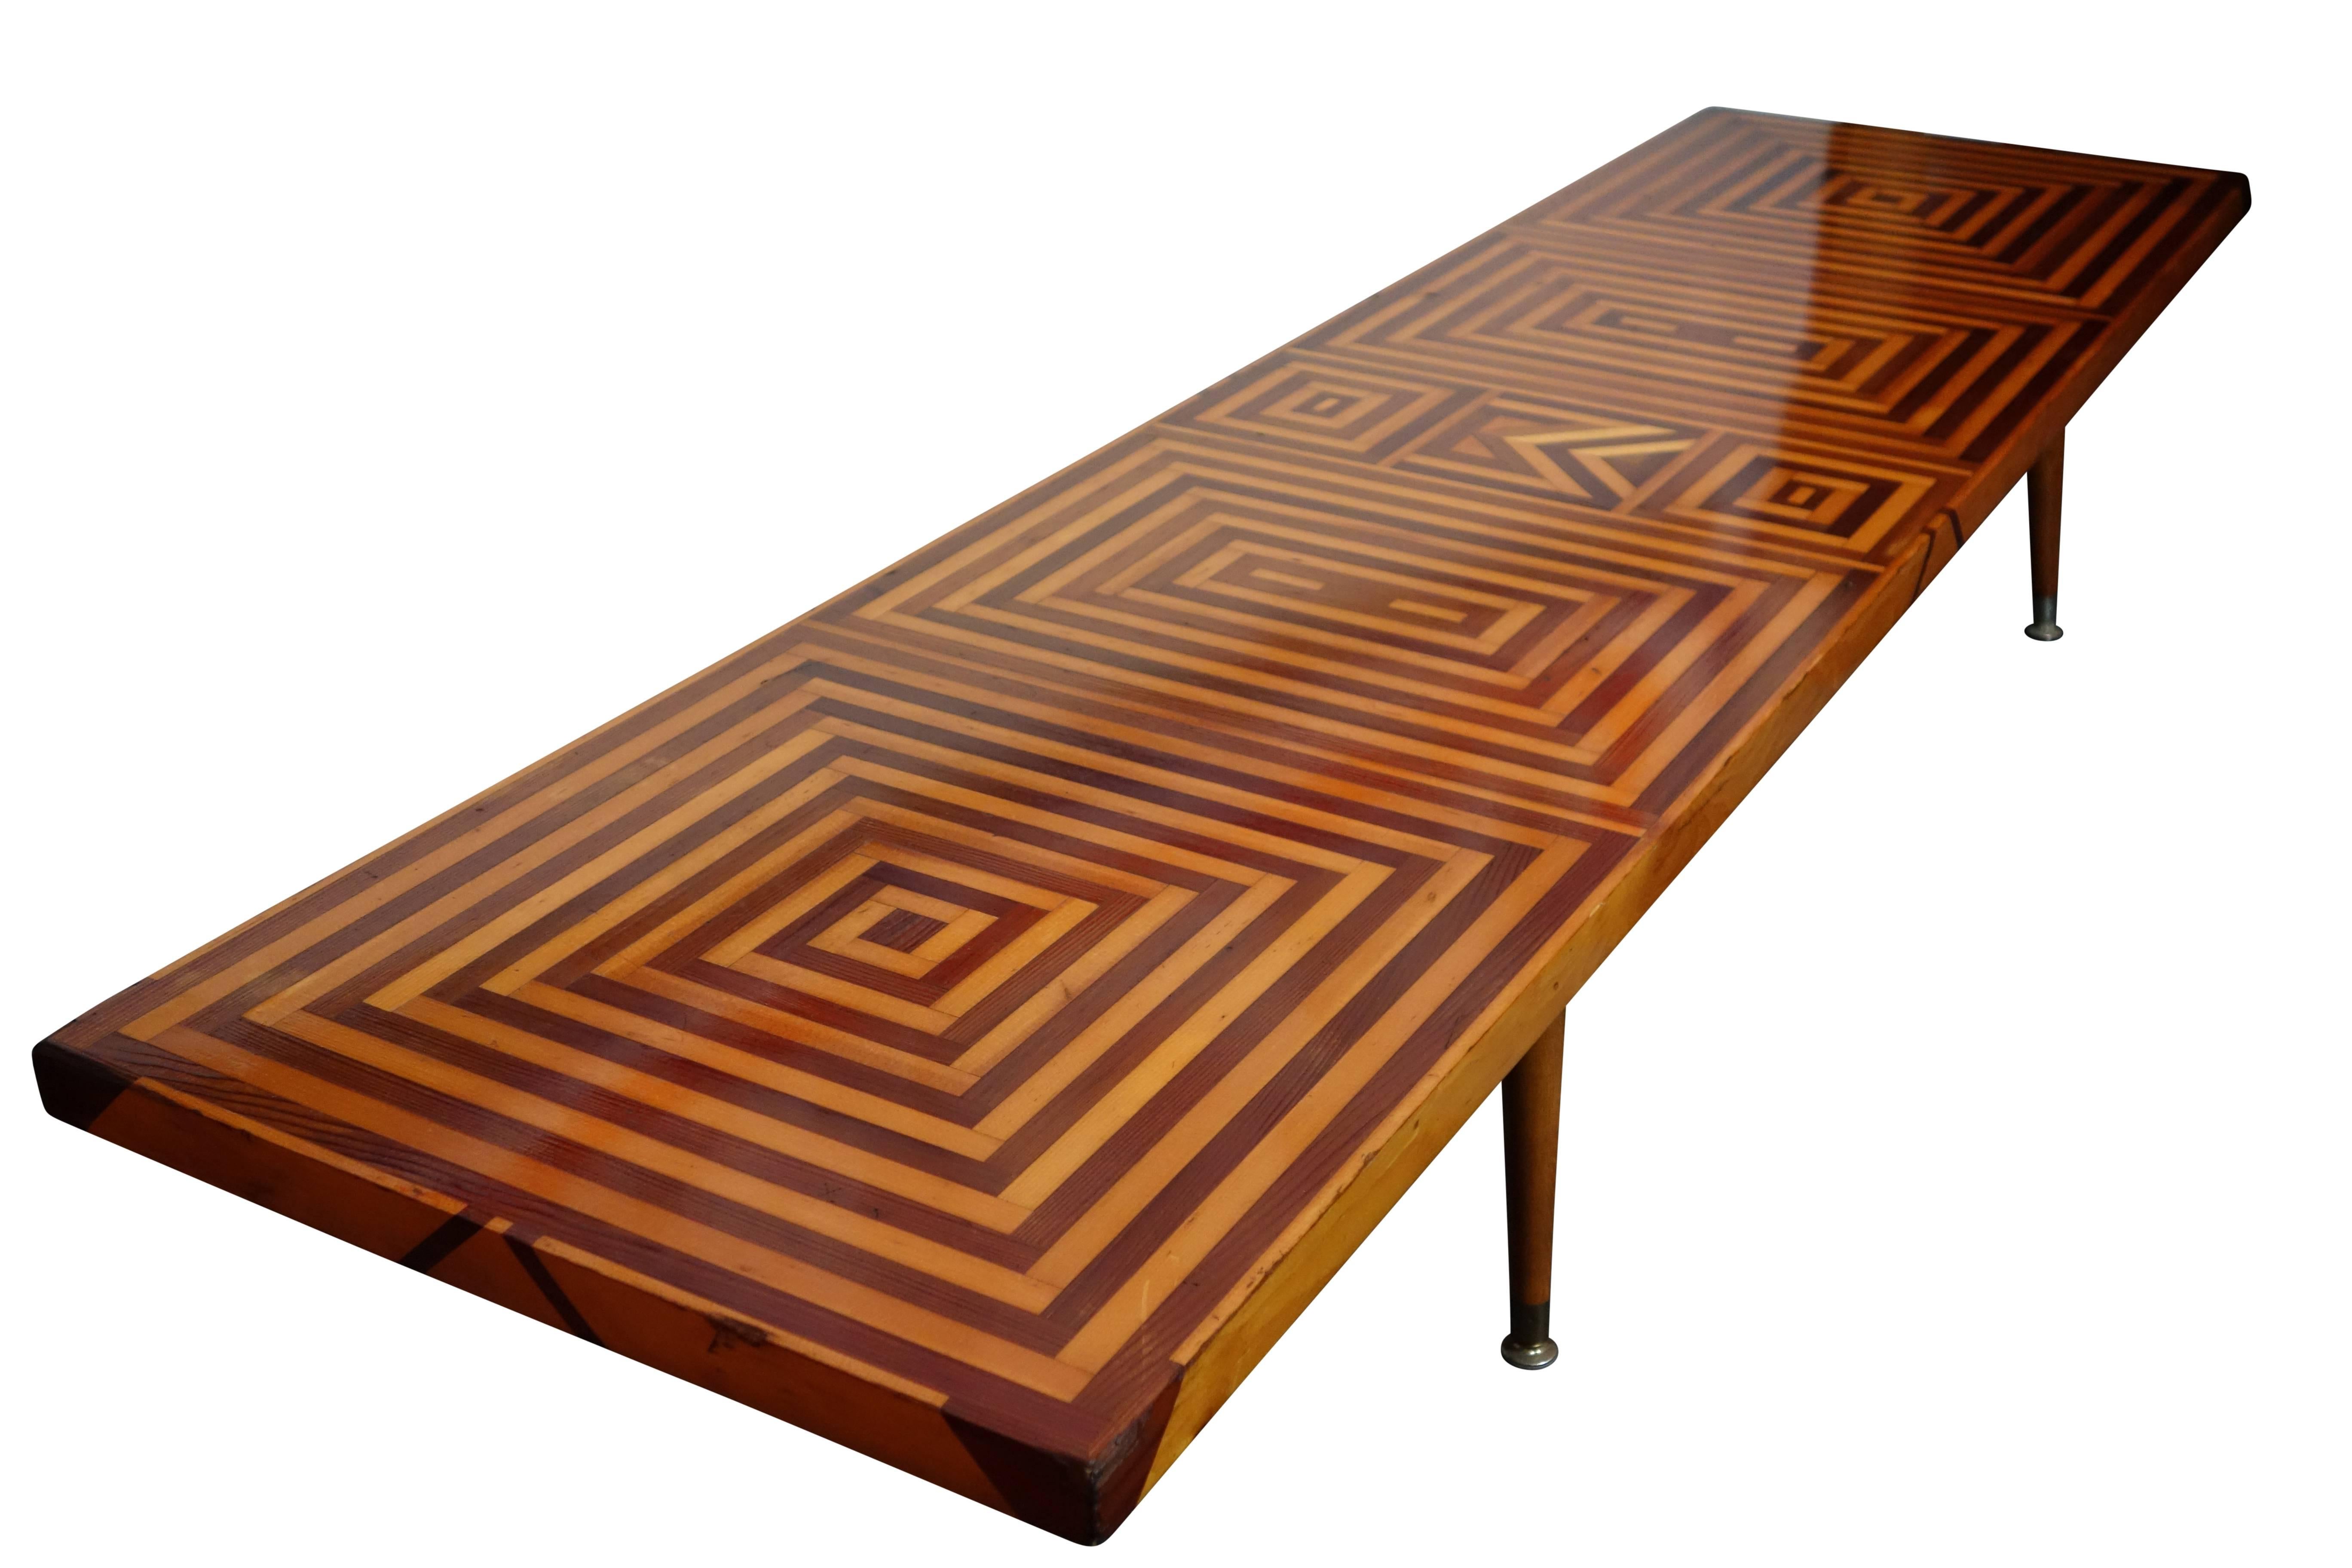 This is a fantastic Mid-Century inlaid walnut and maple coffee table. On the underside of the table, the hardware that attaches the legs has two options, one sets them at an angle, and the other sets them straight.